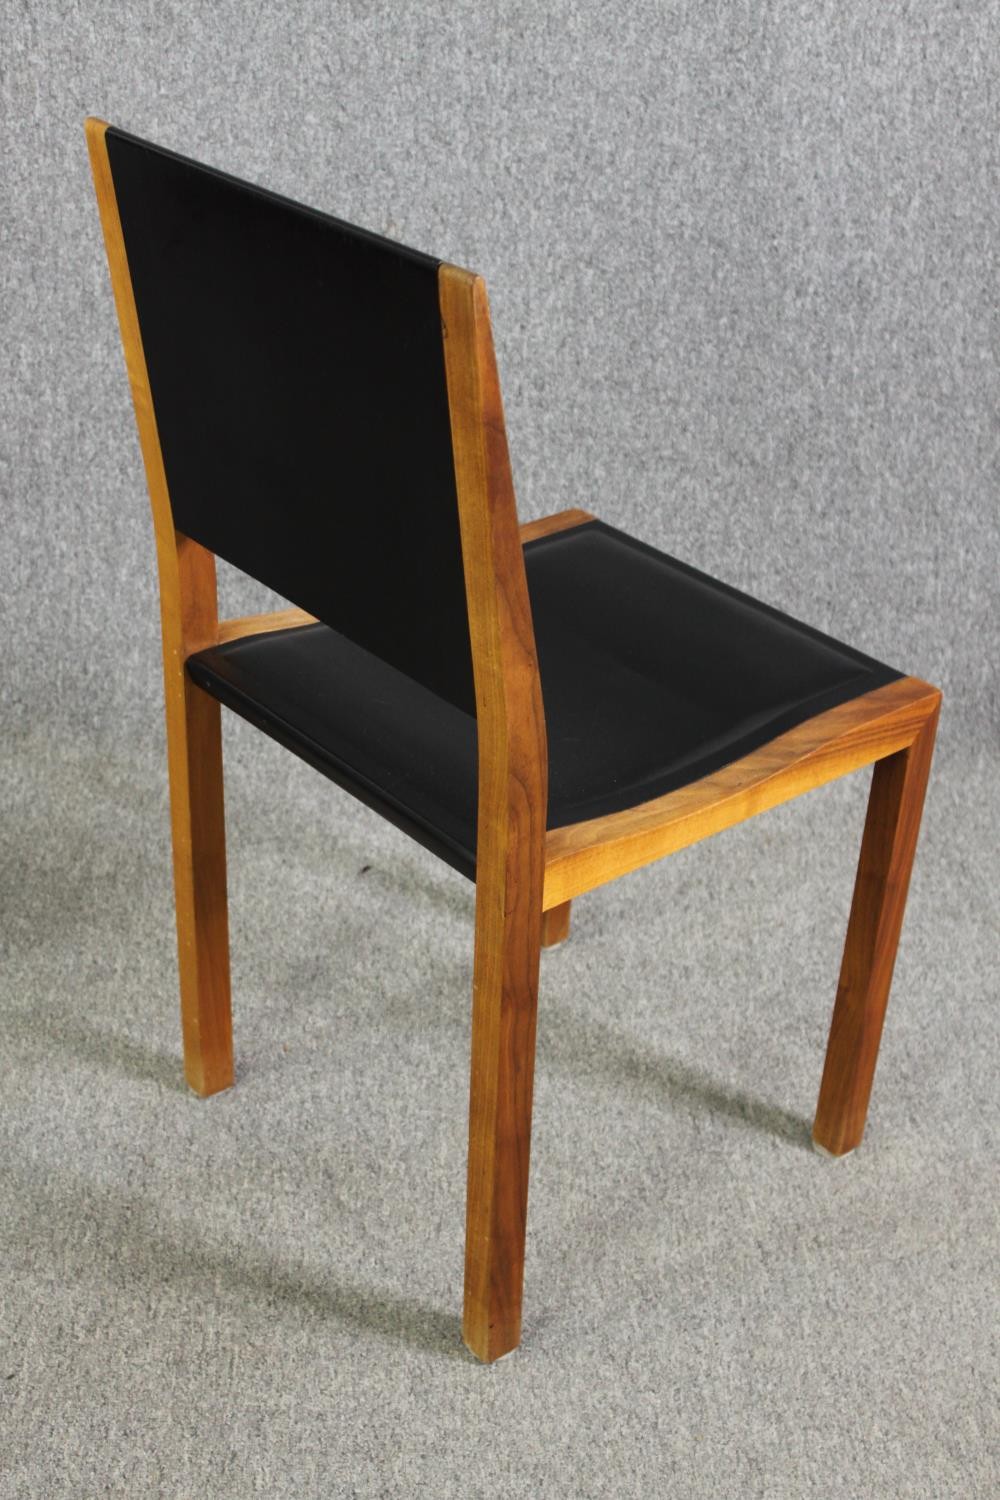 A pair contemporary Heal's teak and black leather dining chairs - Image 5 of 6